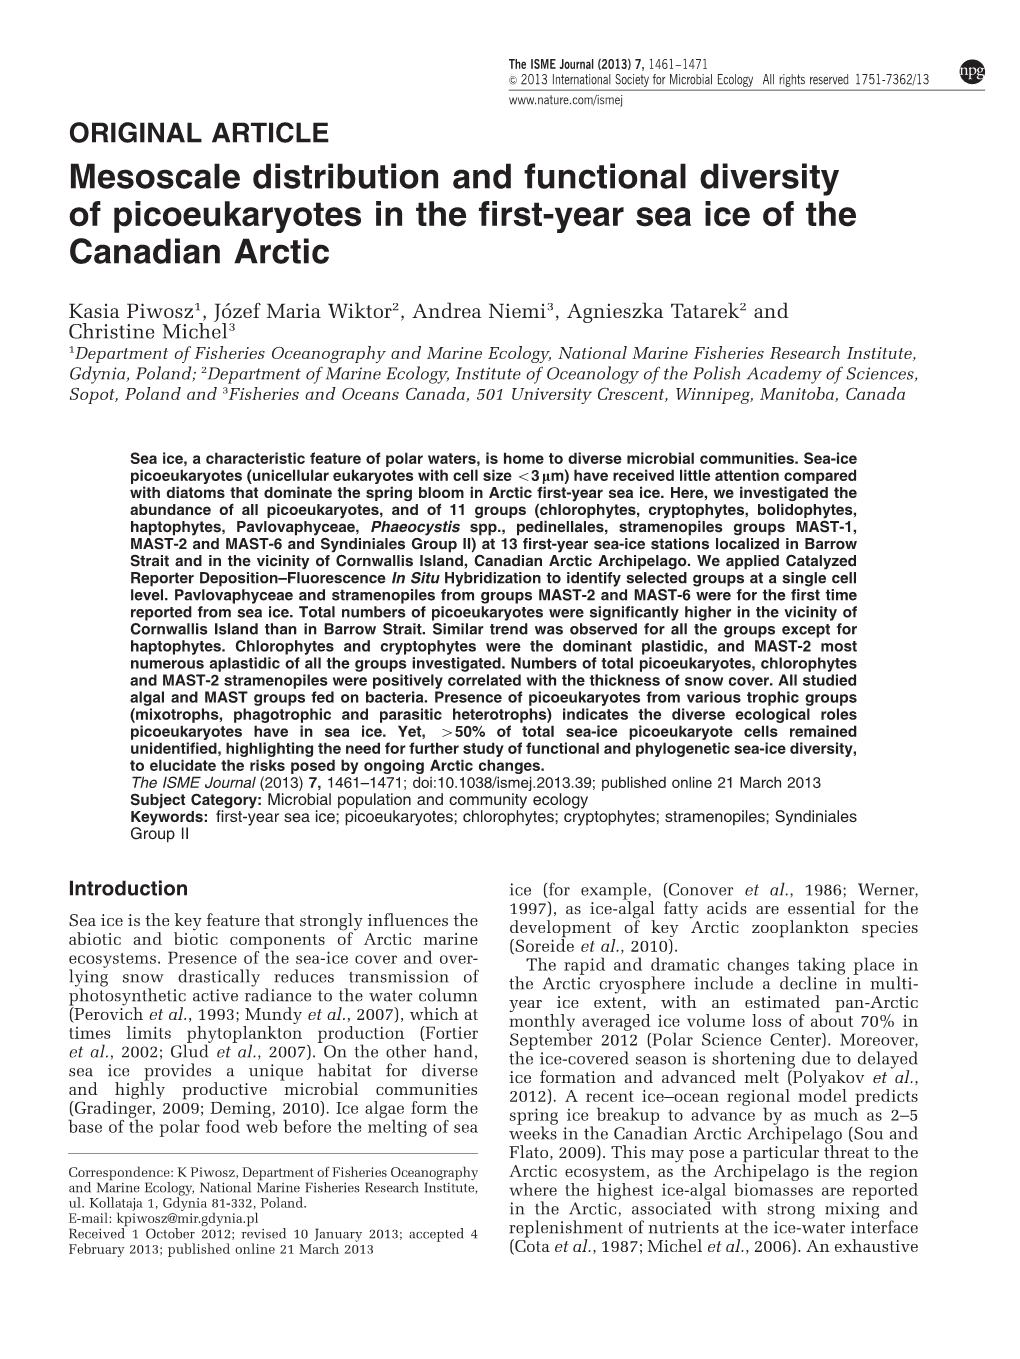 Mesoscale Distribution and Functional Diversity of Picoeukaryotes in the First-Year Sea Ice of the Canadian Arctic